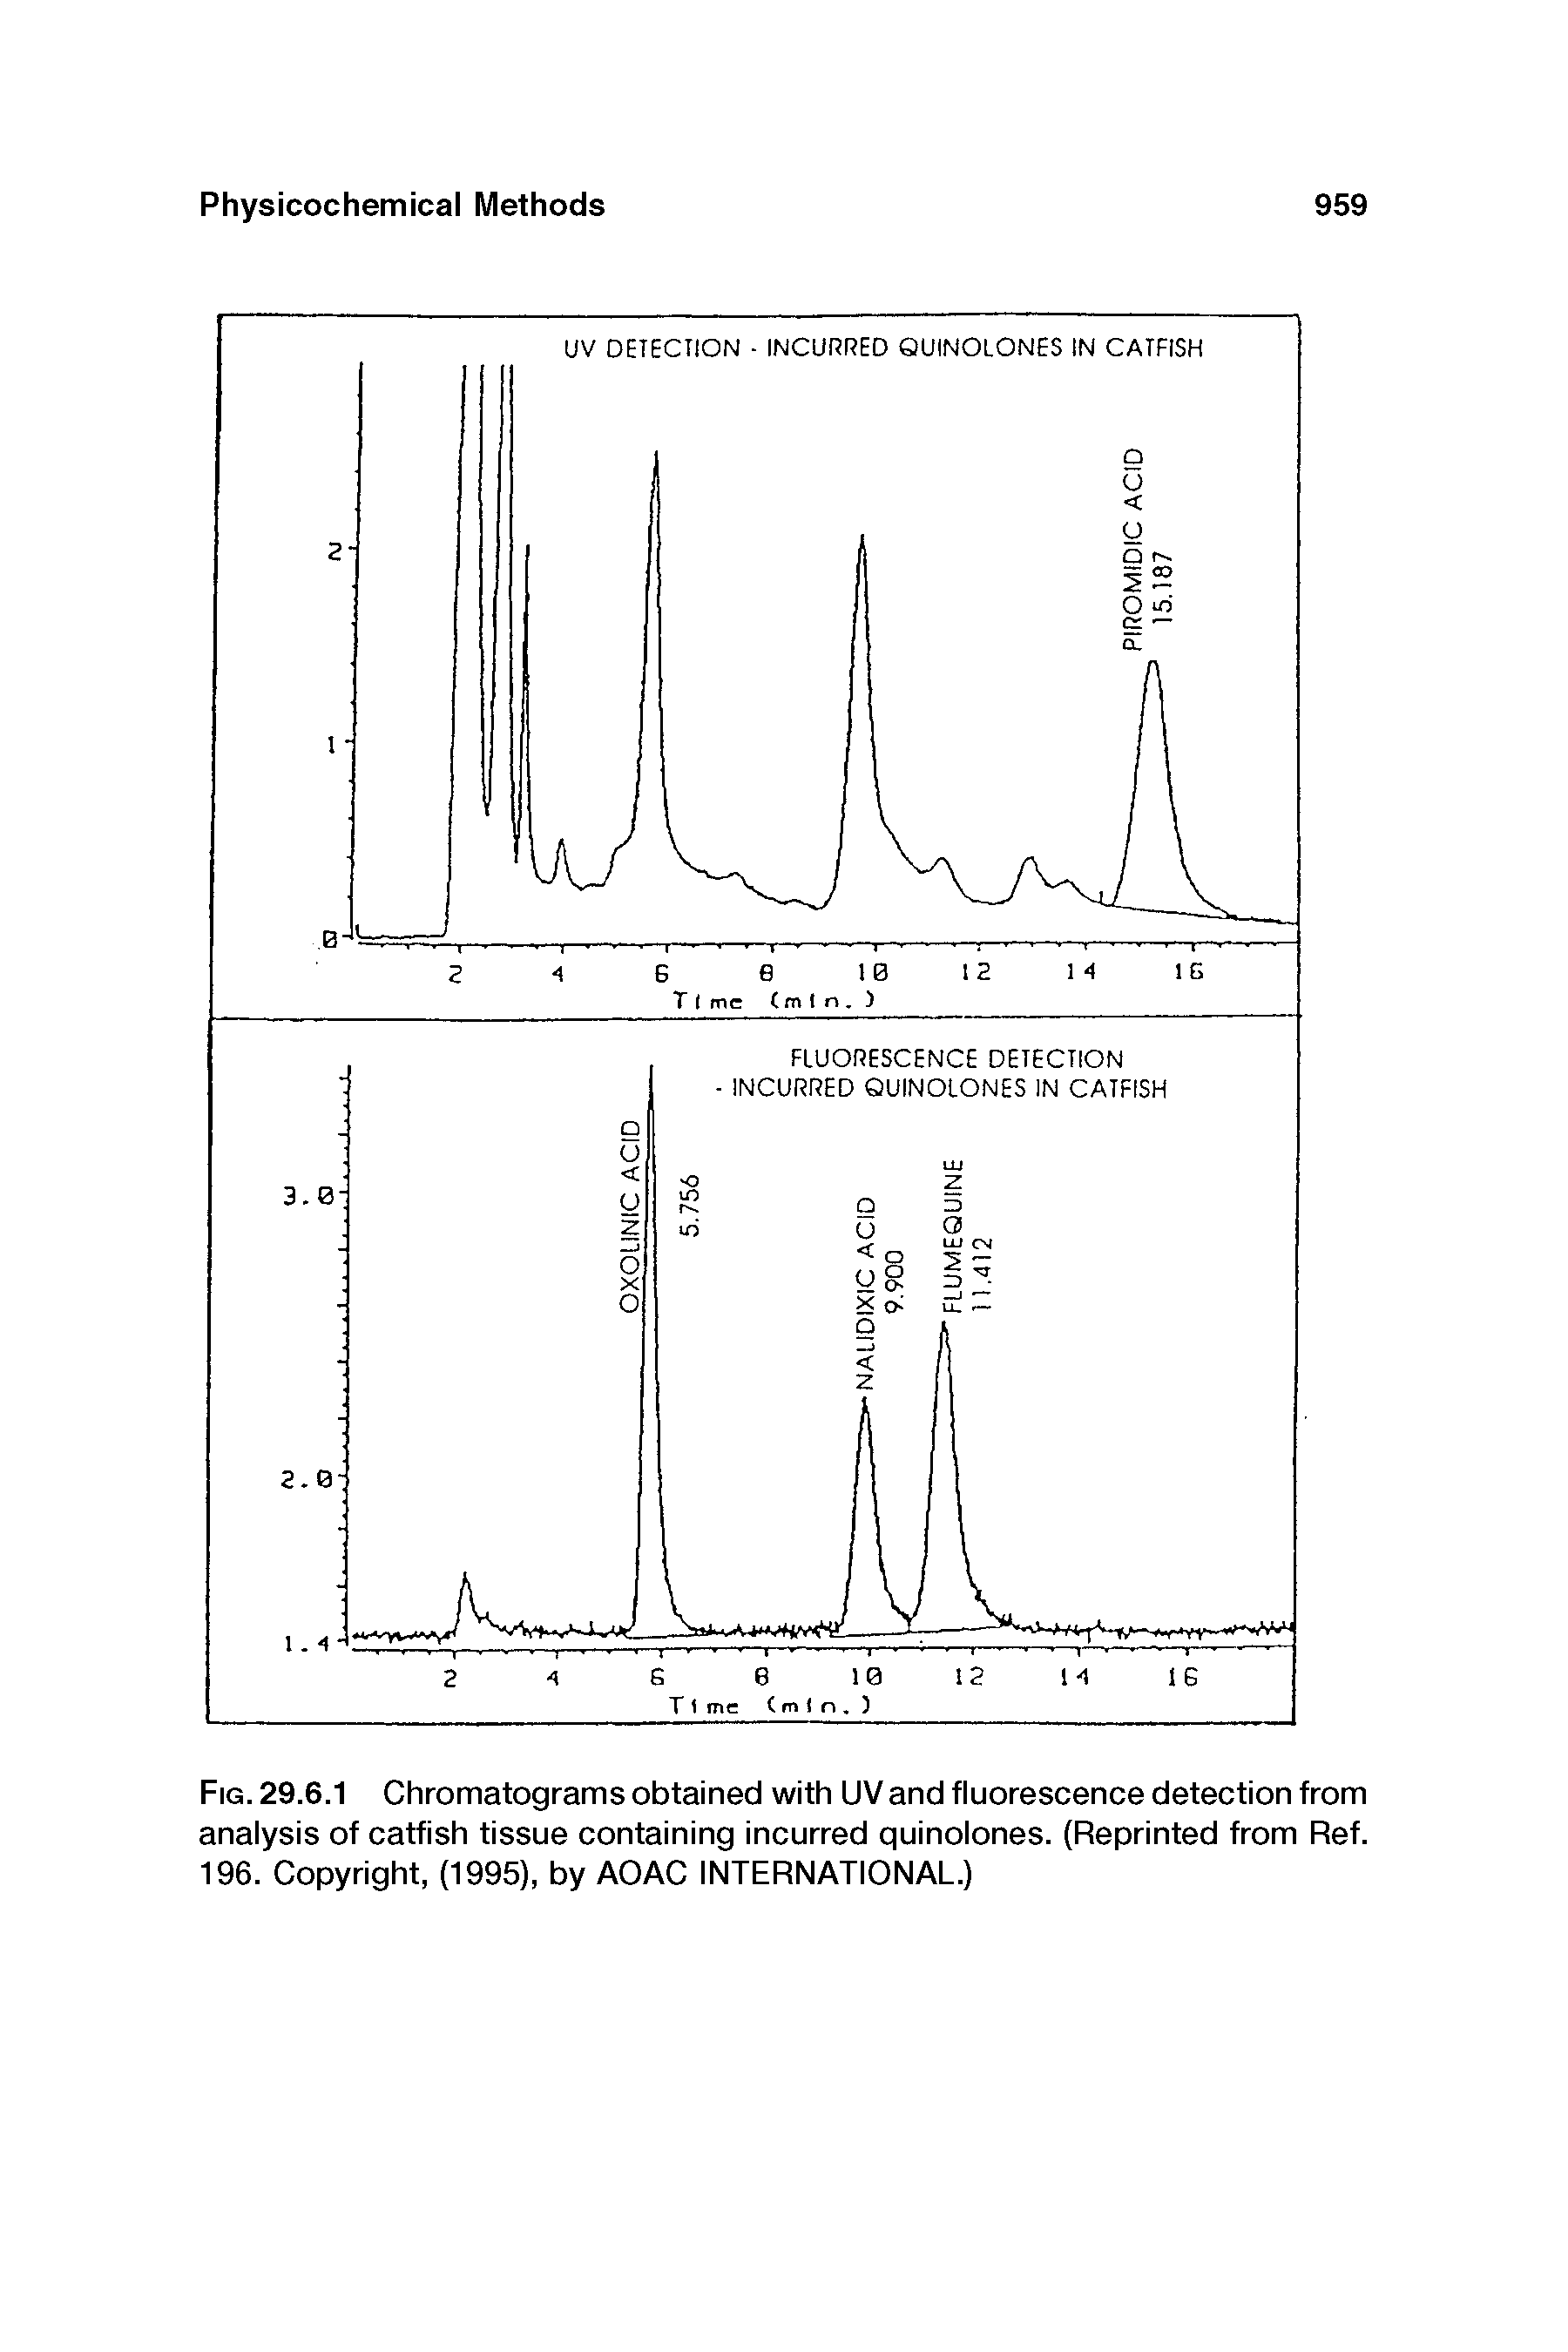 Fig. 29.6.1 Chromatograms obtained with UV and fluorescence detection from analysis of catfish tissue containing incurred quinolones. (Reprinted from Ref. 196. Copyright, (1995), by AOAC INTERNATIONAL.)...